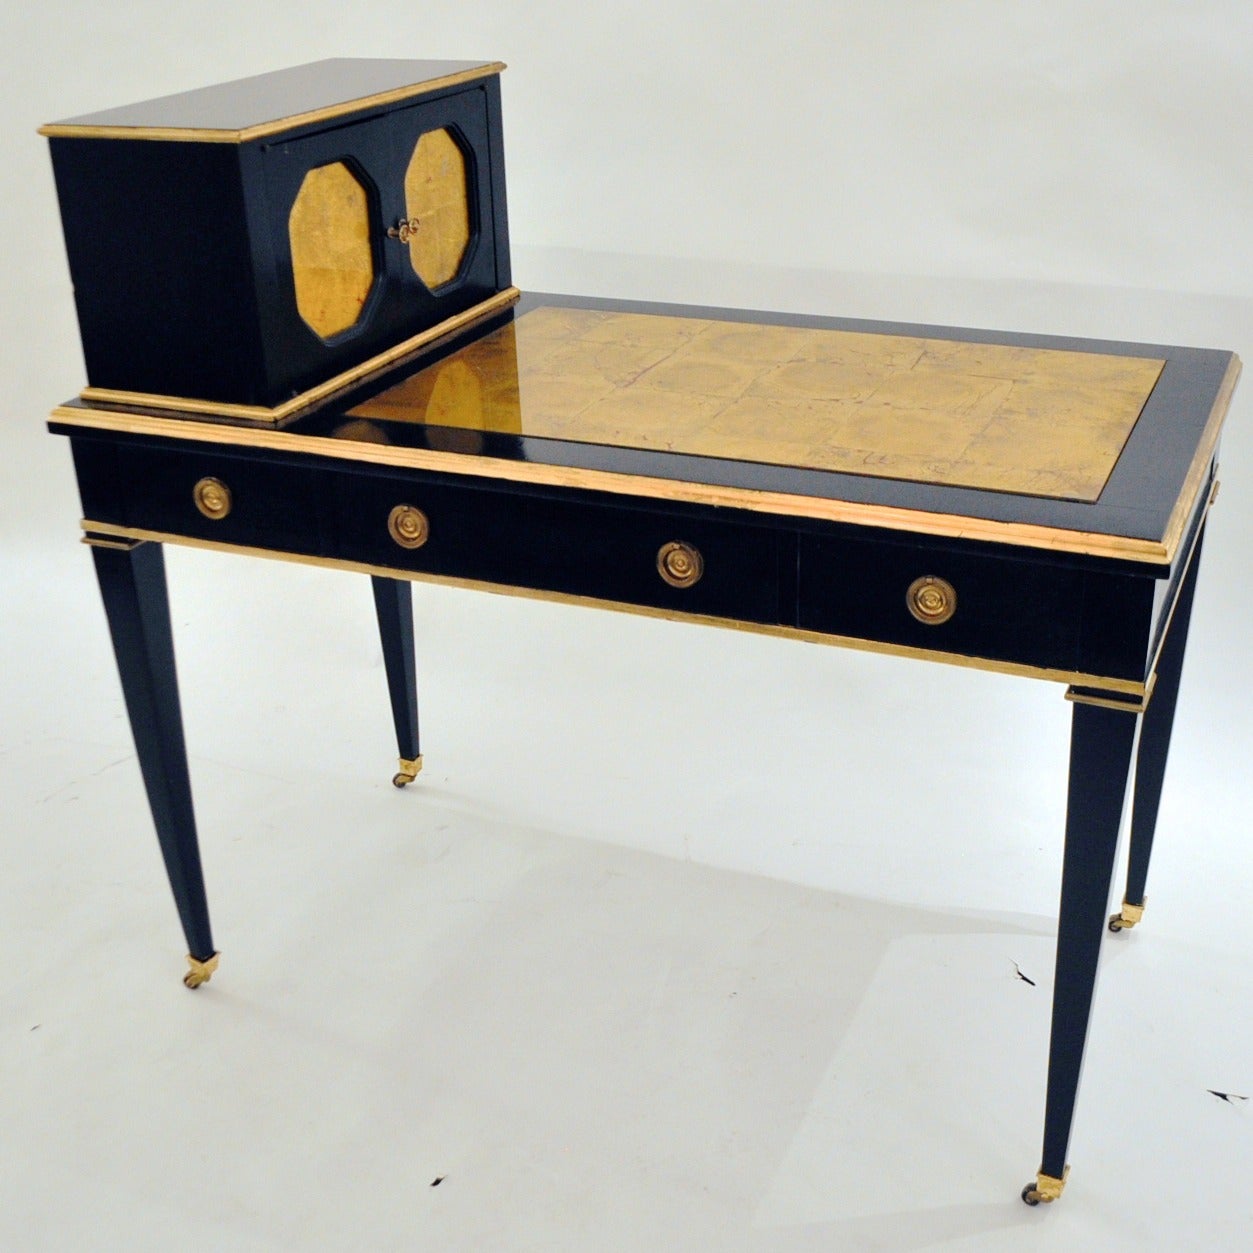 Desk is done in ebony with gold leaf mirrored door fronts and desk top writing area. It has brass drawer pulls knobs and castors.